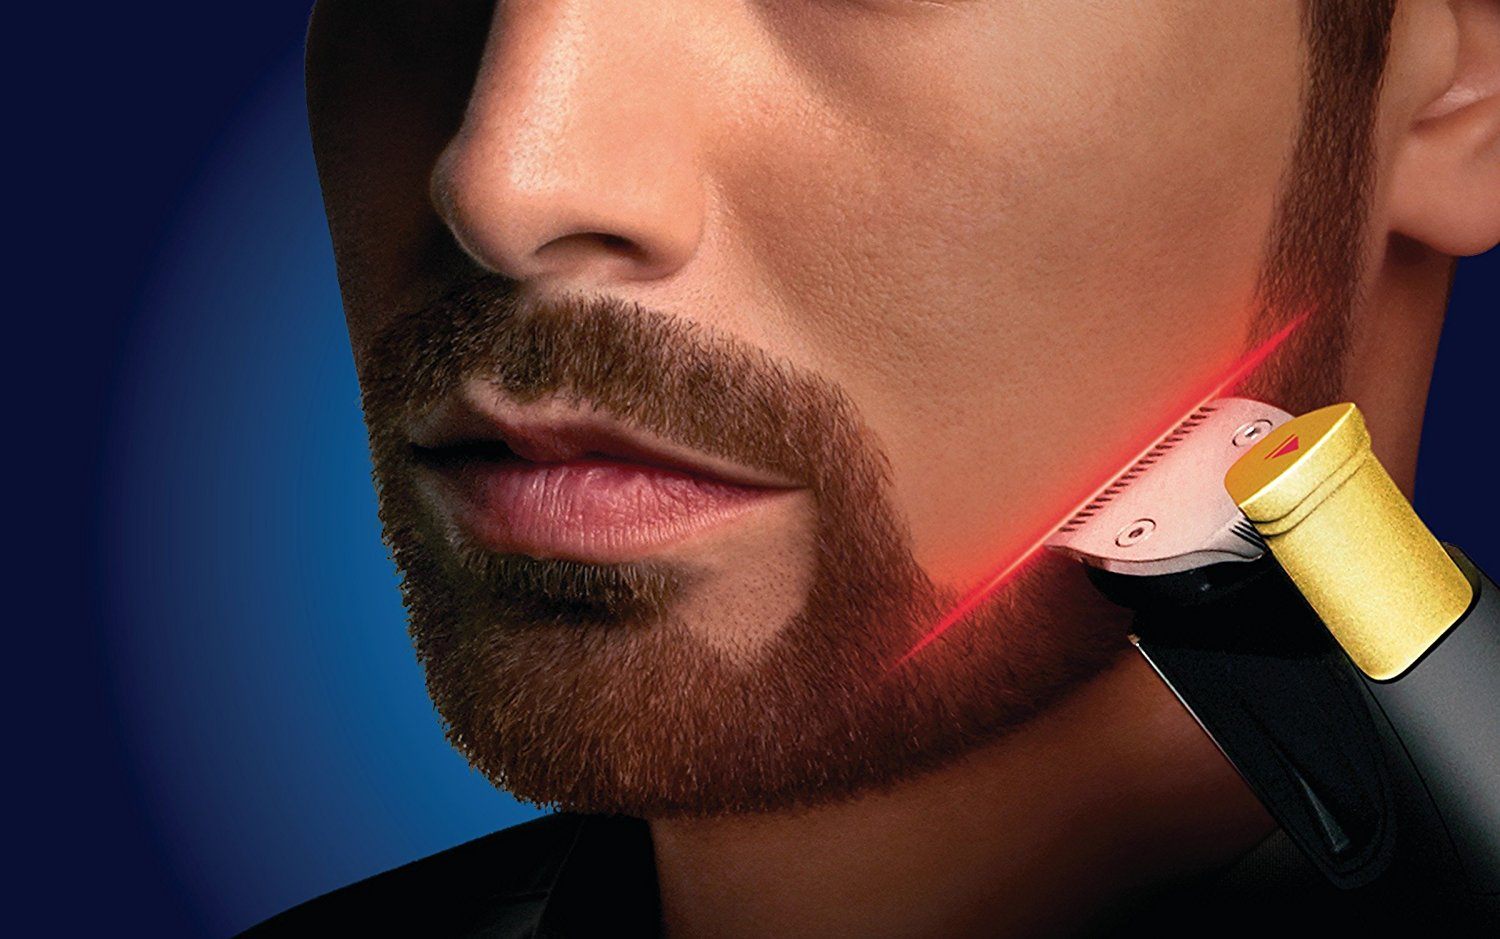 Philips series 9000 Laser Guided Beard Trimmer in use